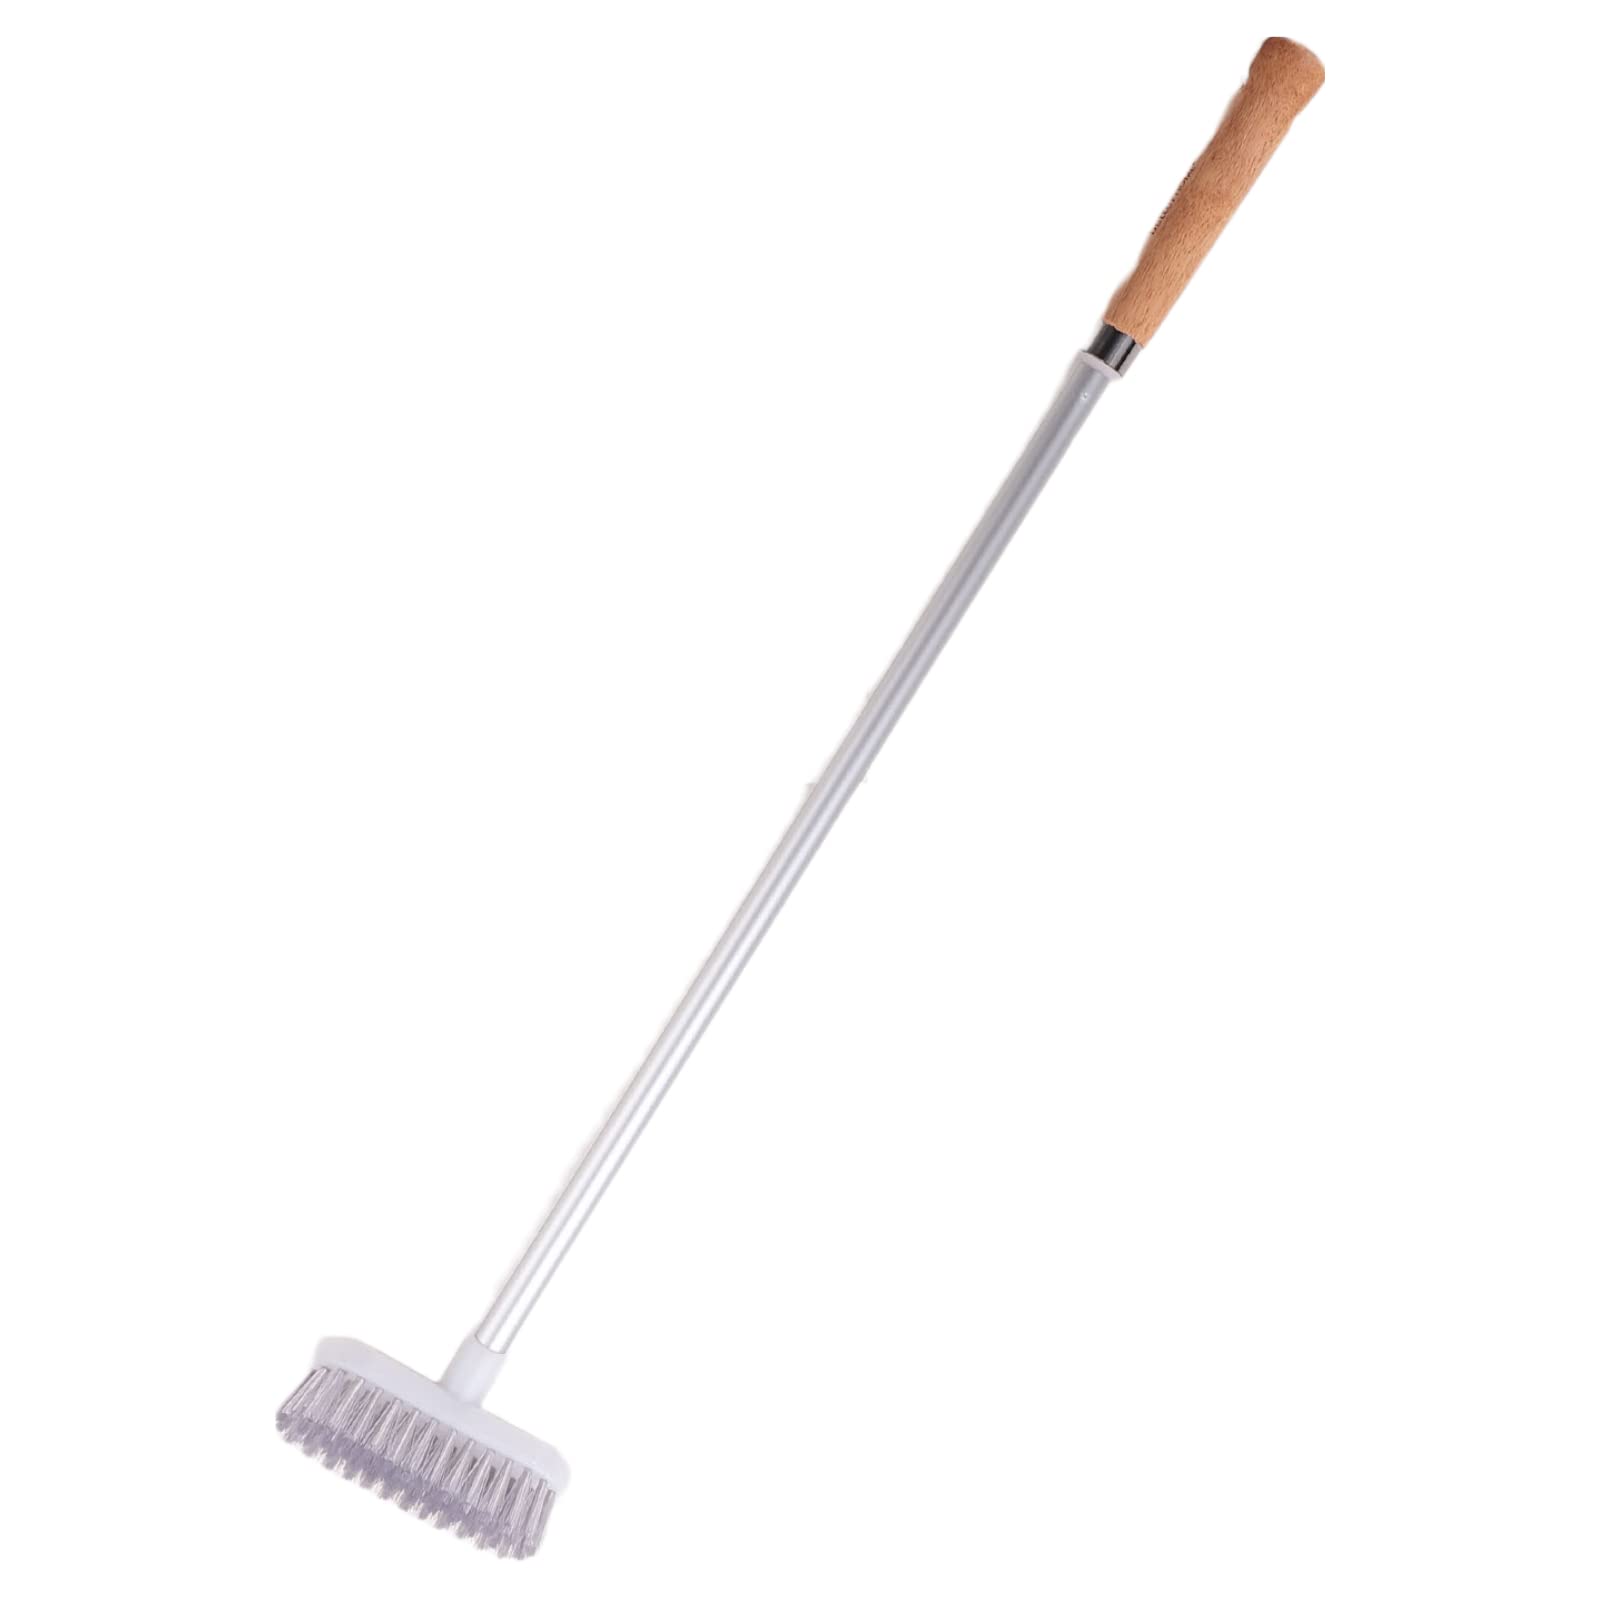 The Better Home Floor and Bathroom Cleaning Brush with Long Handle